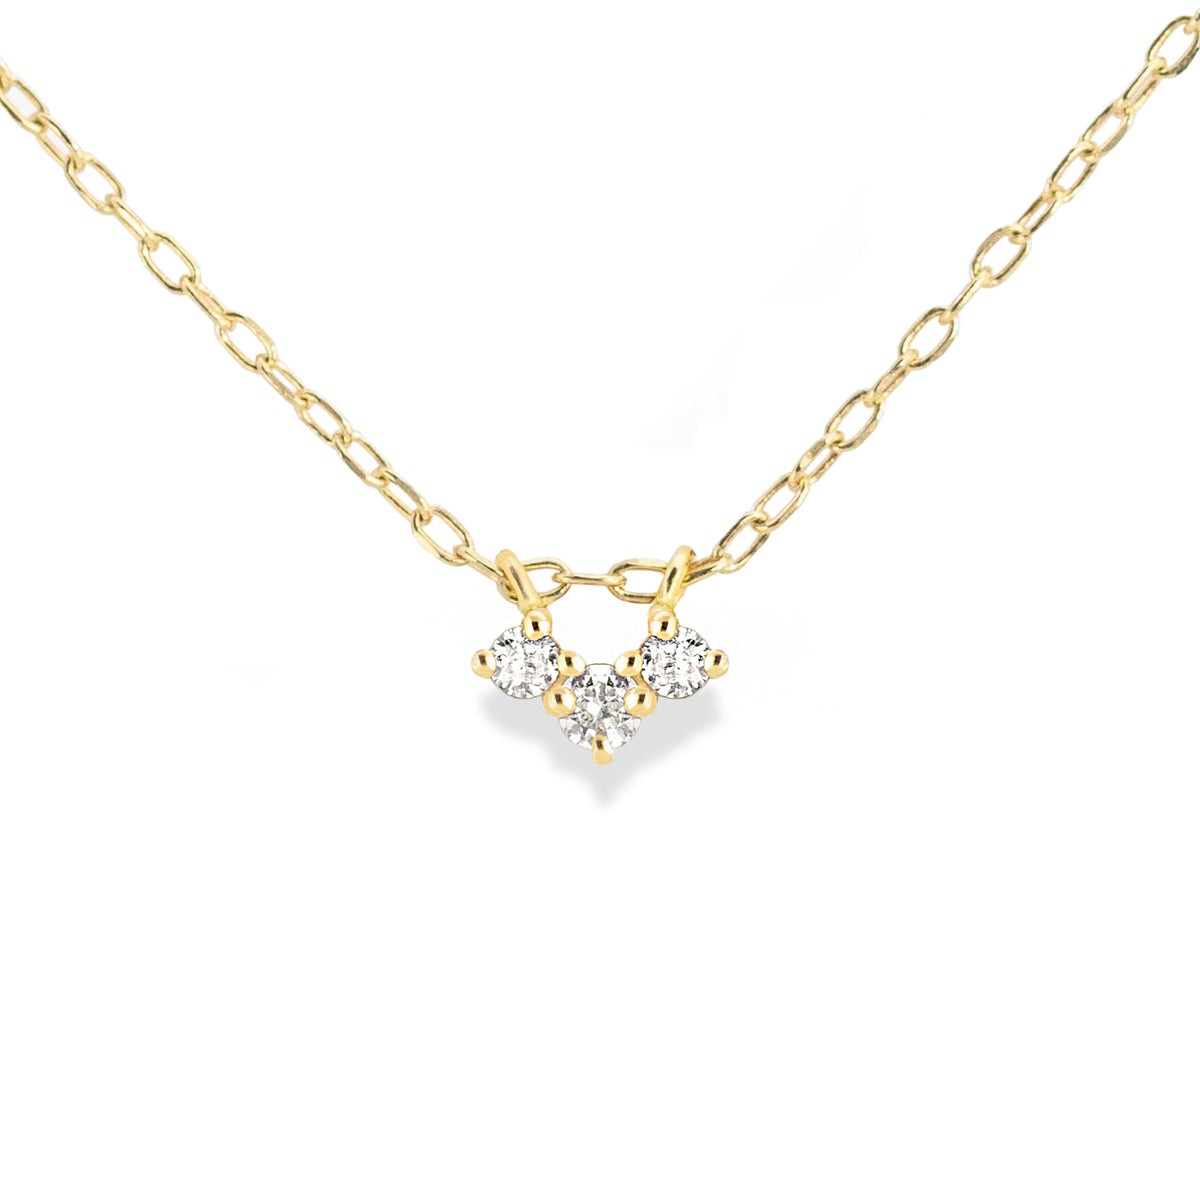 Jamie Park Jewelry - Three Diamond Necklace Upgrade everyday looks with this classic dainty diamond necklace. Perfect for day or night, this piece is perfect for wearing on special occasions or adding a touch of sparkles&amp;nbsp;to your everyday look.